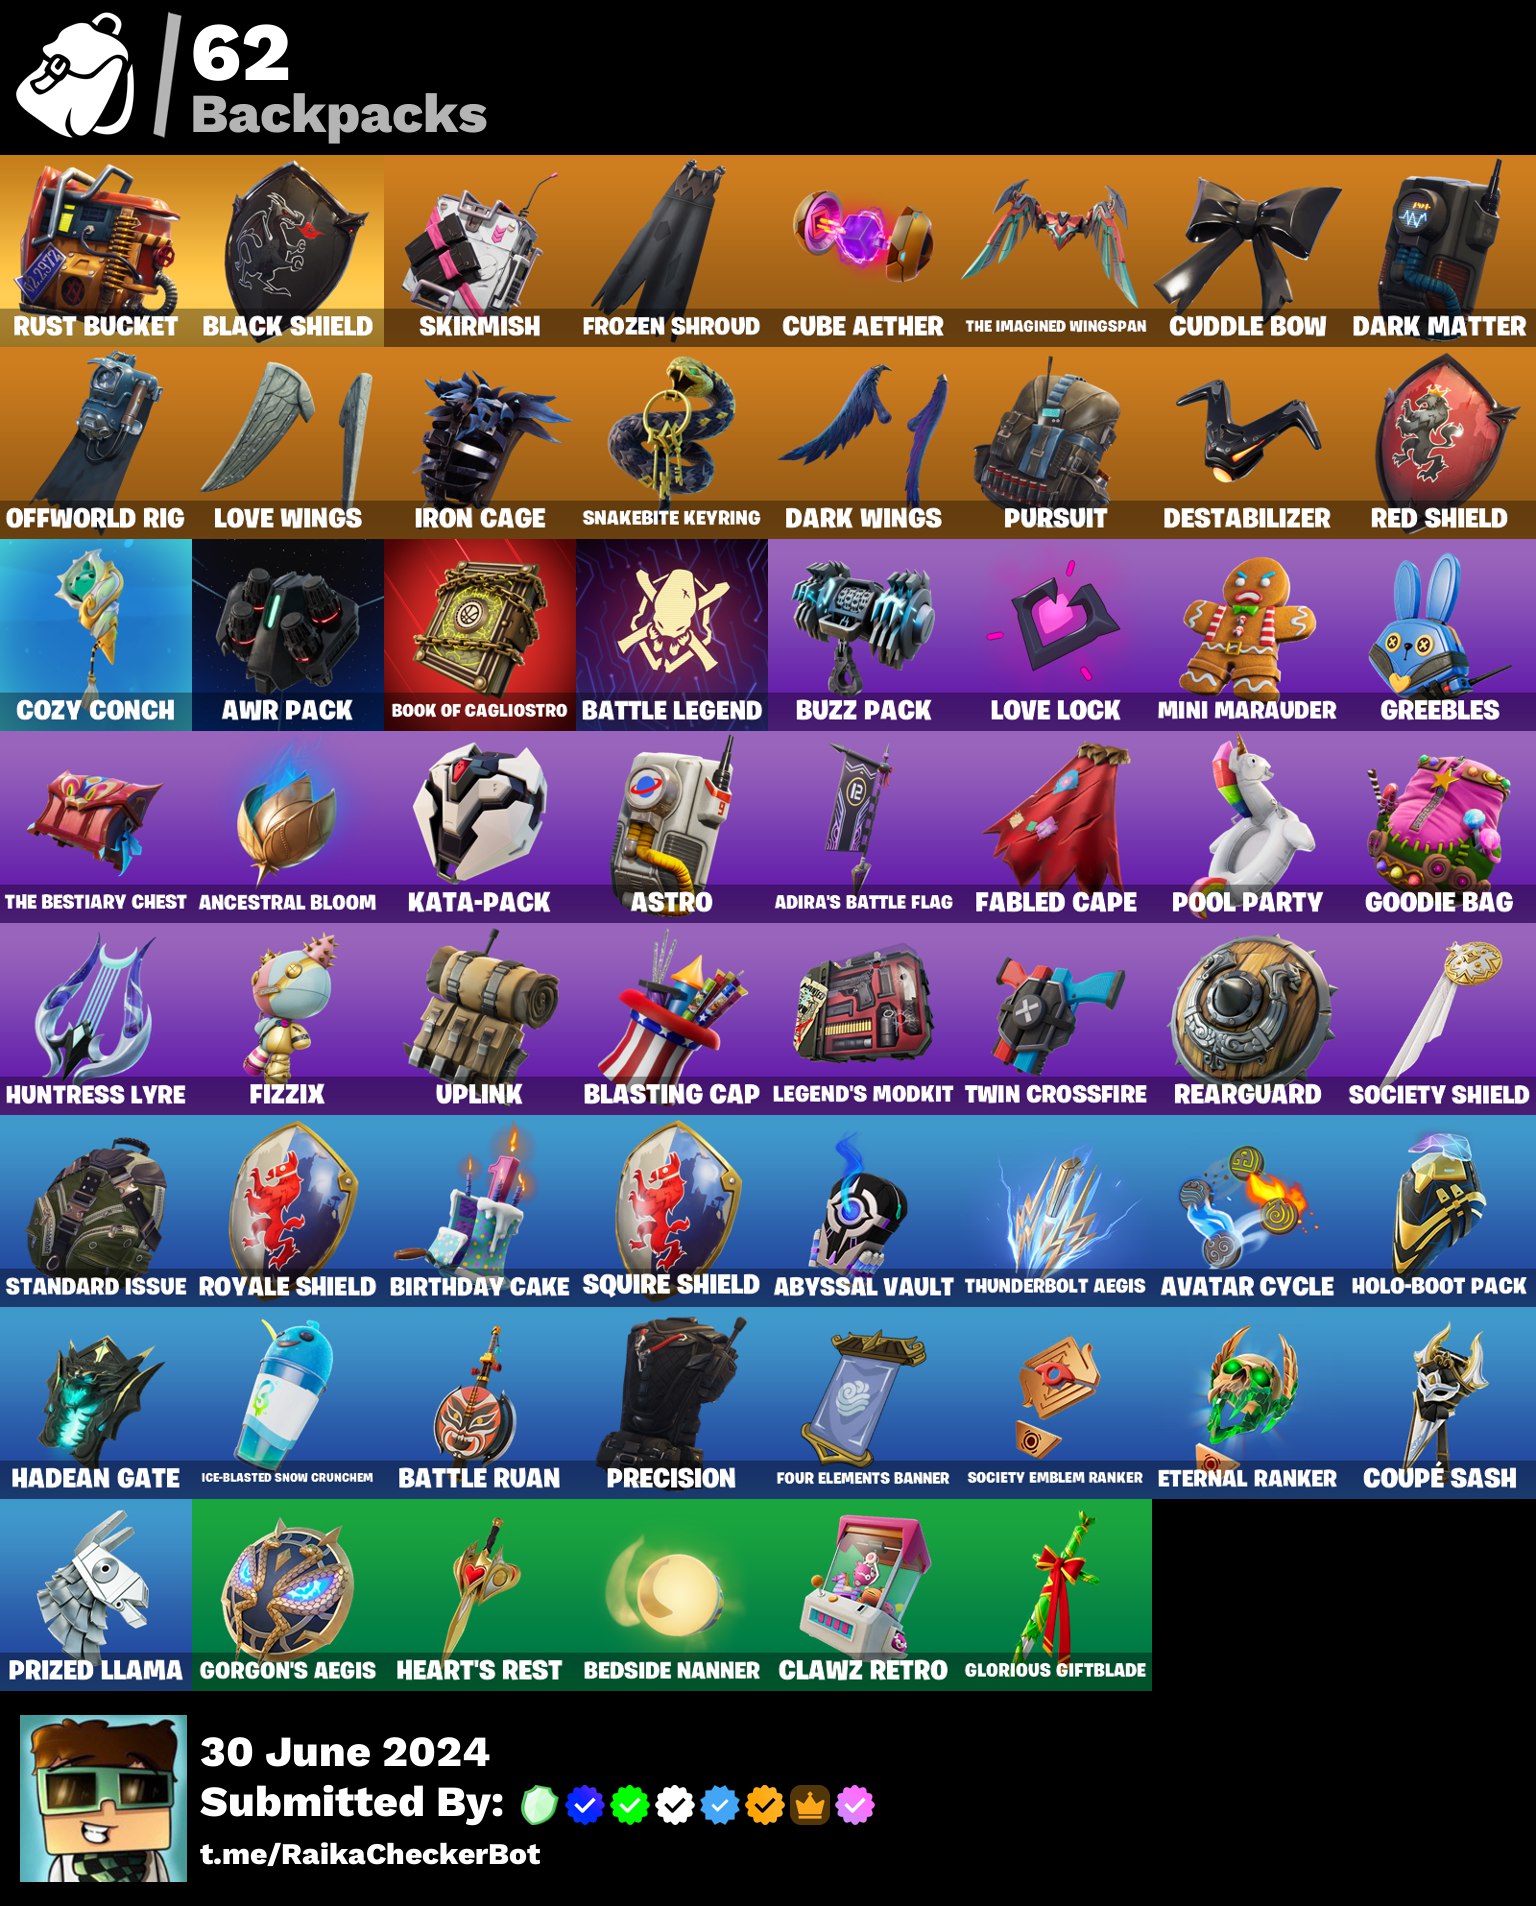 FA [PC] 62 skins | BLACK KNIGHT, FLOSS , The Reaper , Blue Squire , Royale Knight , Sparkle Specialist 